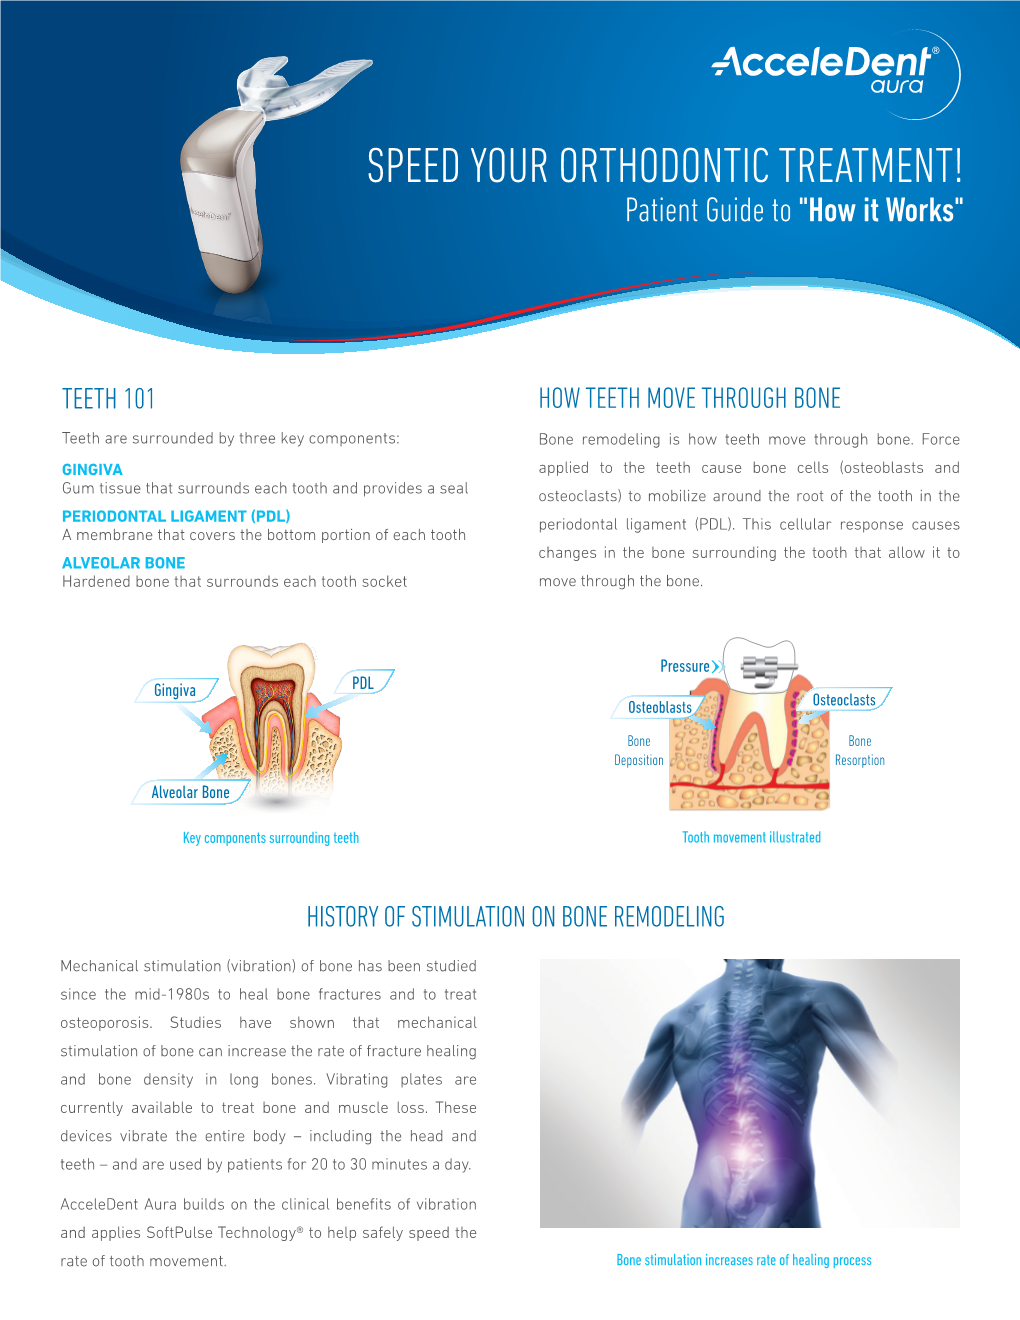 SPEED YOUR ORTHODONTIC TREATMENT! Patient Guide to "How It Works"